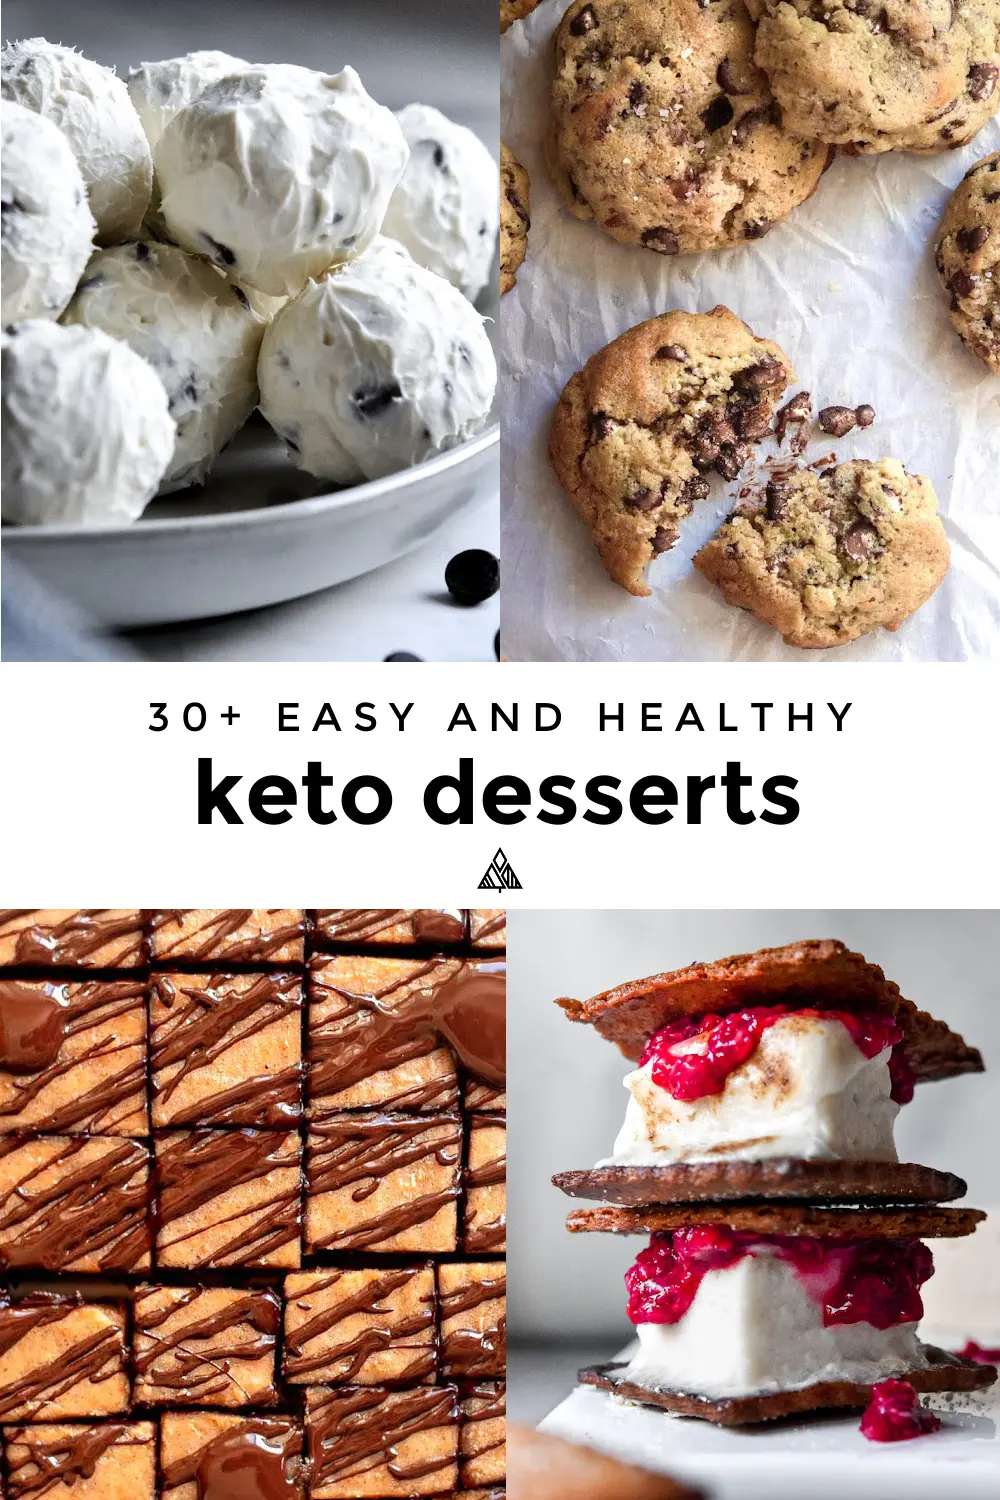 45 Low Carb Desserts bring flavor and indulgence without the carbs to keep the festivities going all holiday long! #lowcarbdesserts #ketodesserts